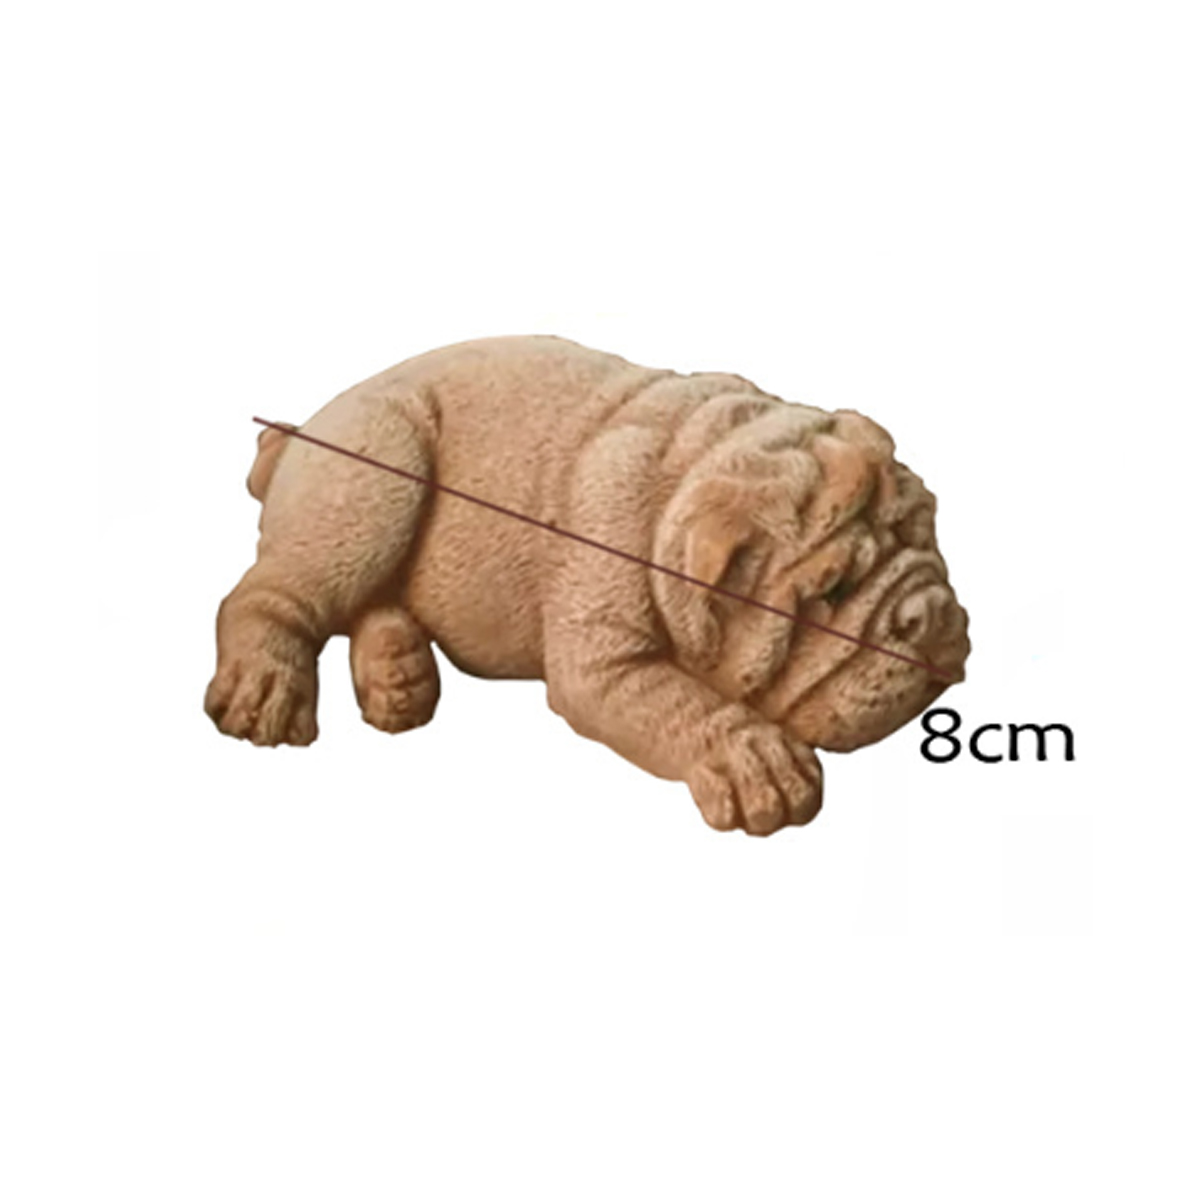 3D-Dog-Puppy-Silicone-Cake-Mold-Mould-Fondant-Chocolate-Baking-Mold-Cookies-DIY-Tool-Decorations-1458403-2